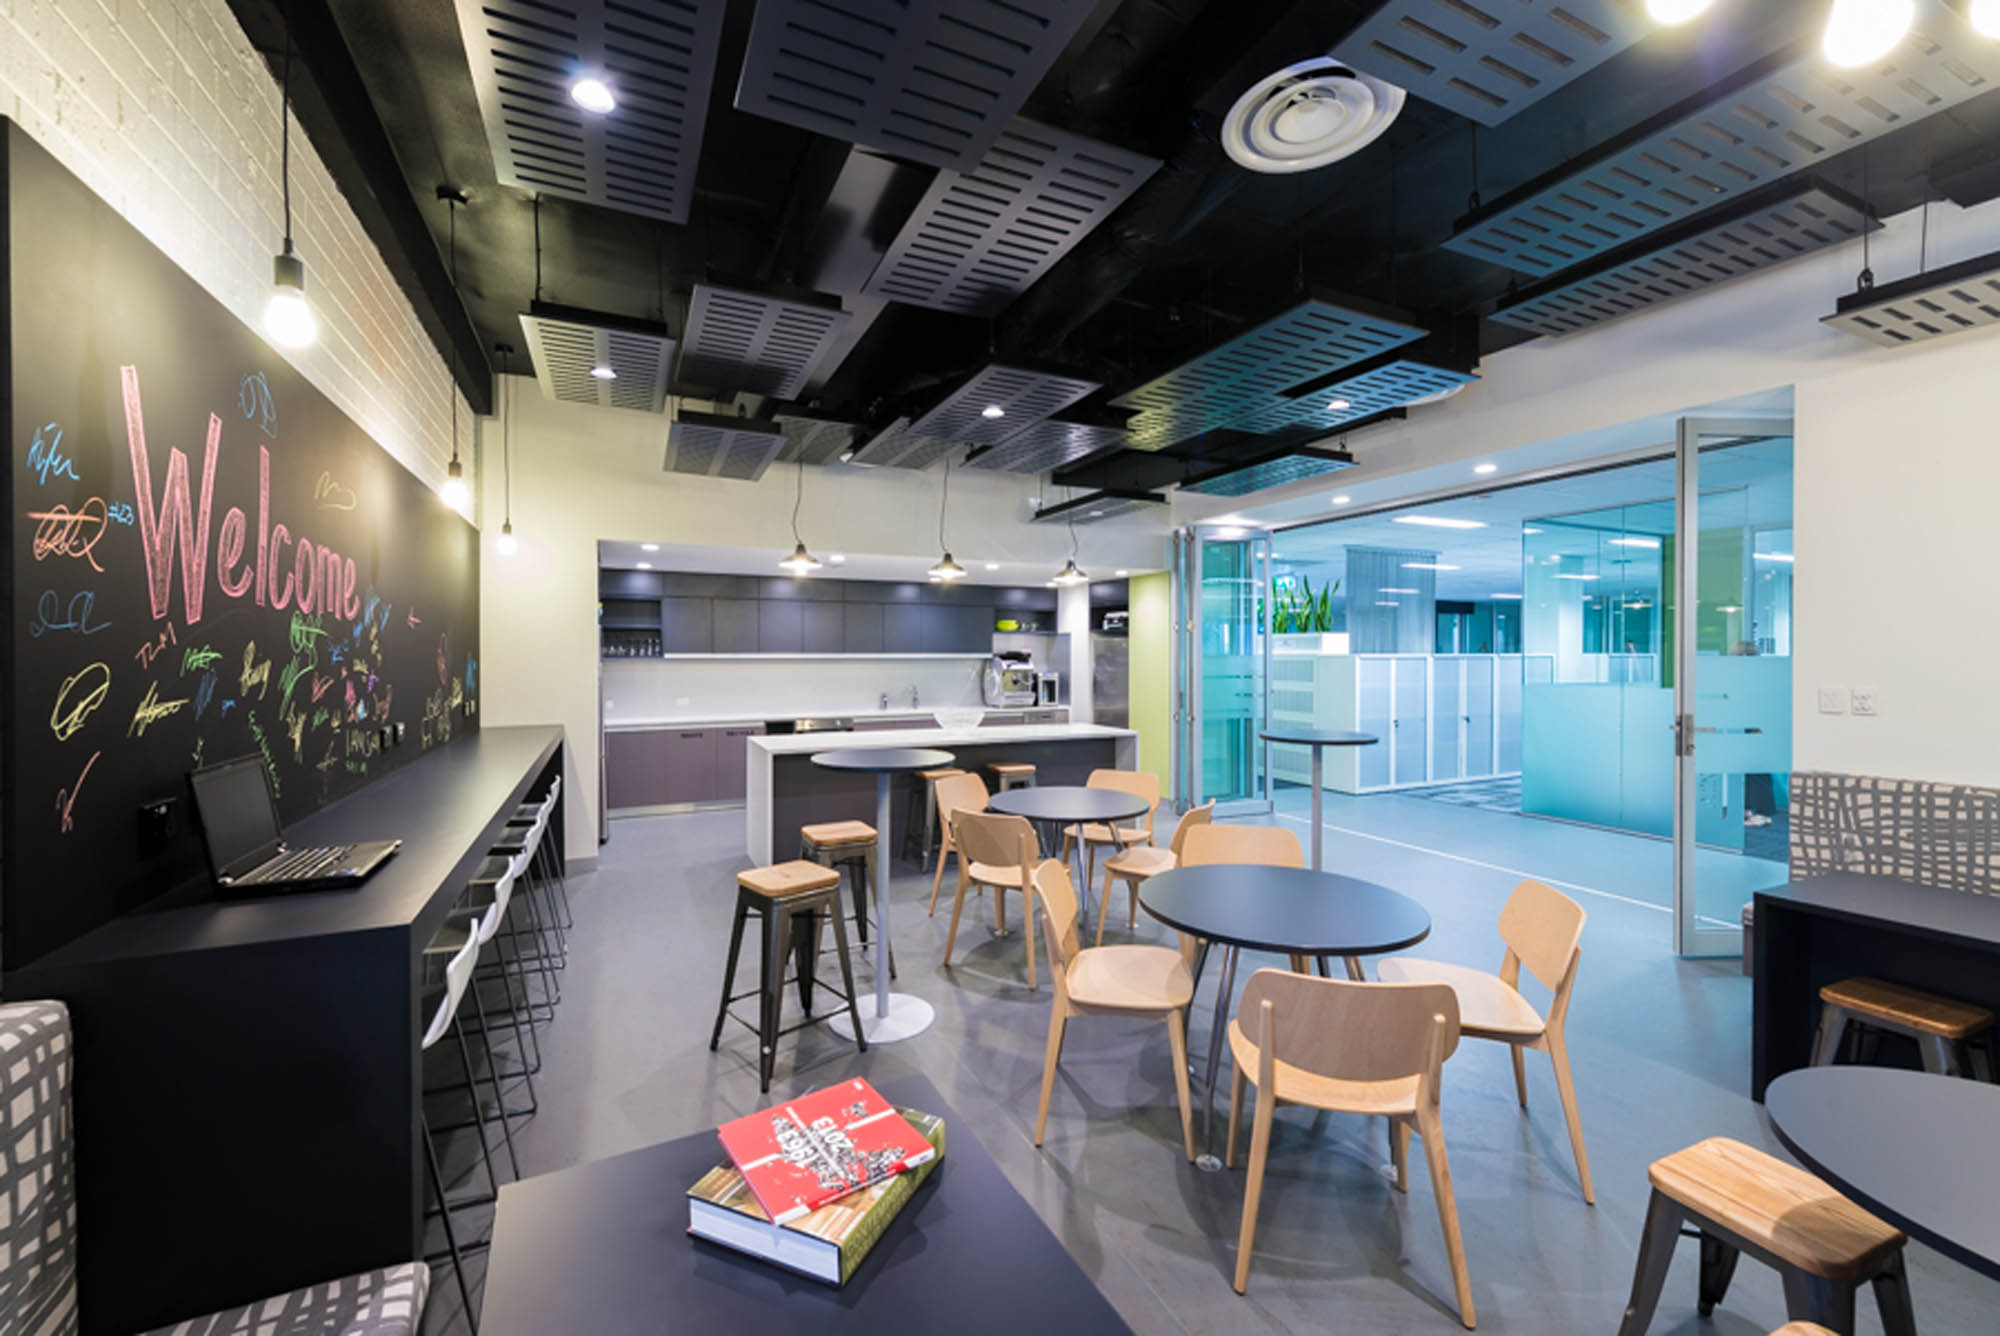 bdo adelaide breakout kitchen exposed ceiling ducts fitout